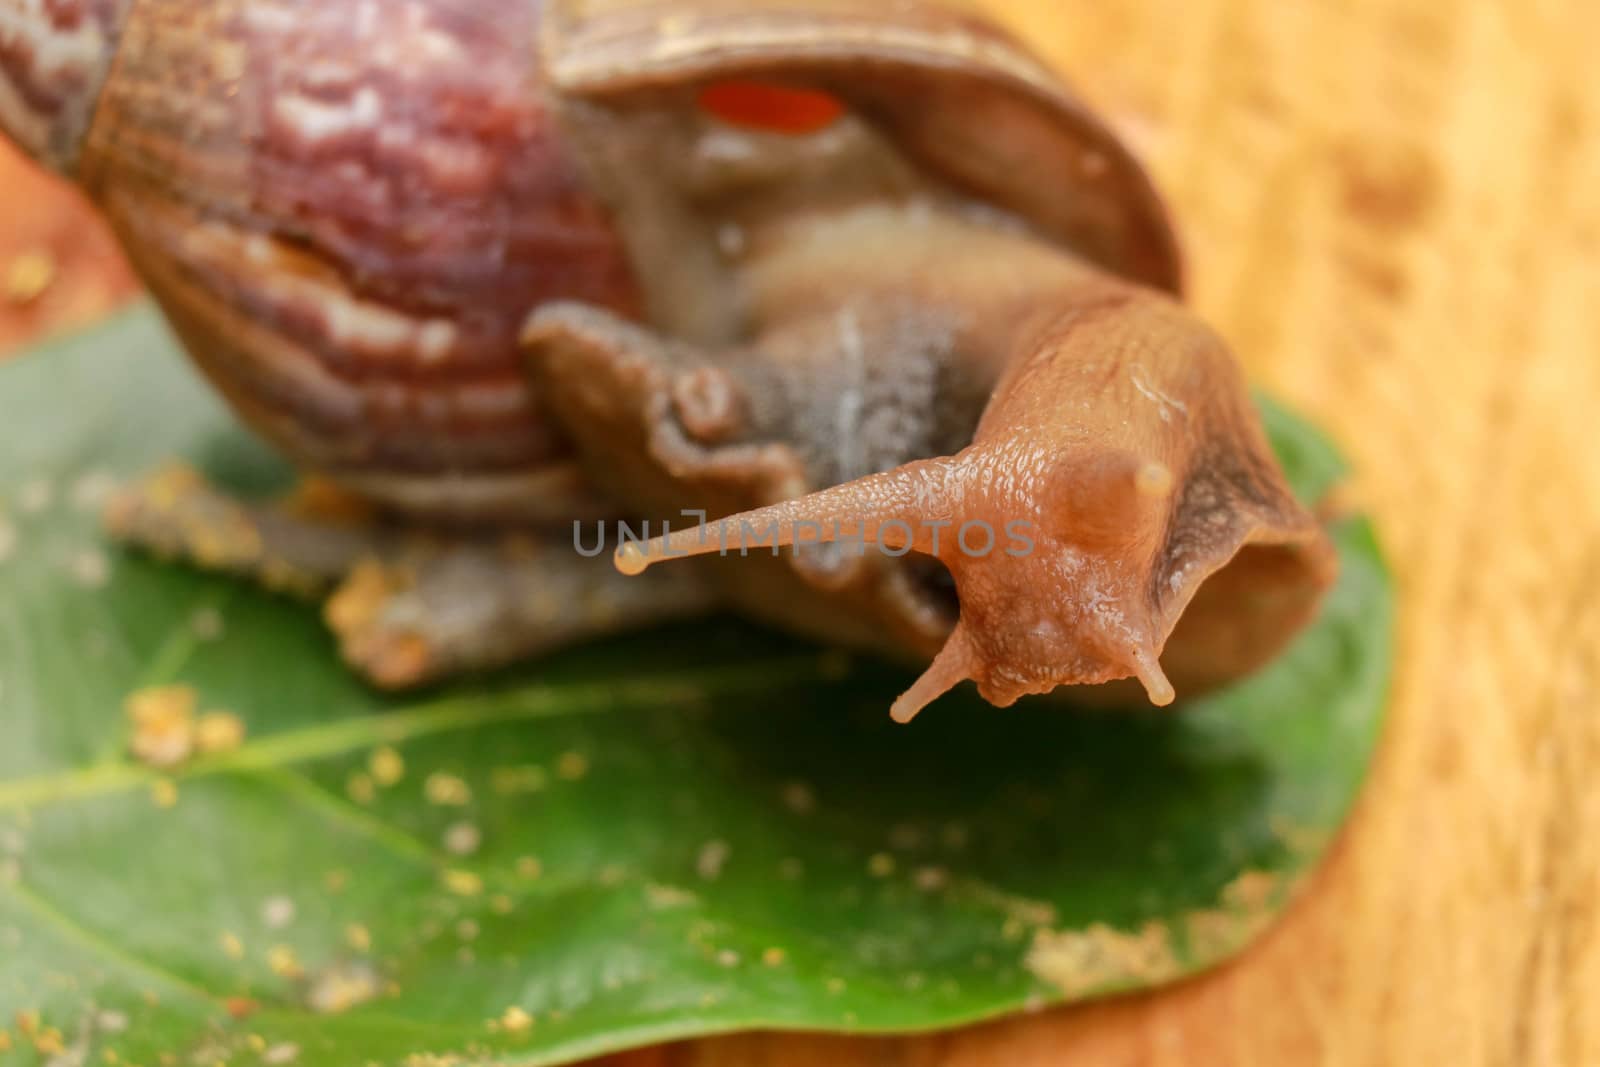 Giant African Land Snail - Achatina fulica large land snail in Achatinidae, similar to Achatina achatina and Archachatina marginata, pest issues, invasive species of snail by Sanatana2008